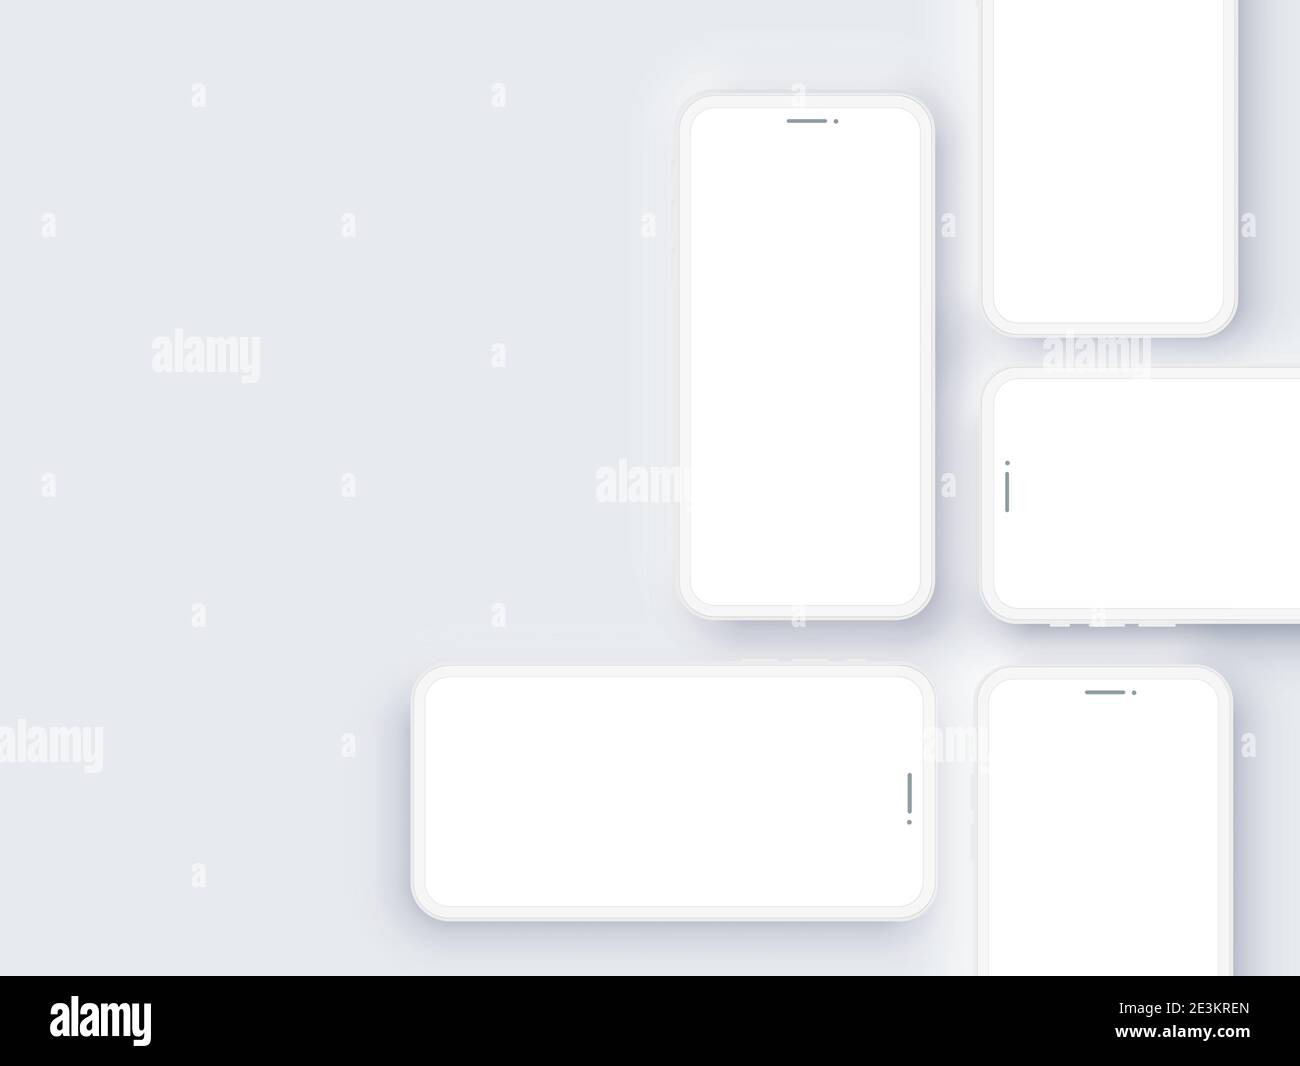 Realistic Mobile Phone Neomorphism Template Mockup Vector. White 3D Front Design Stock Vector